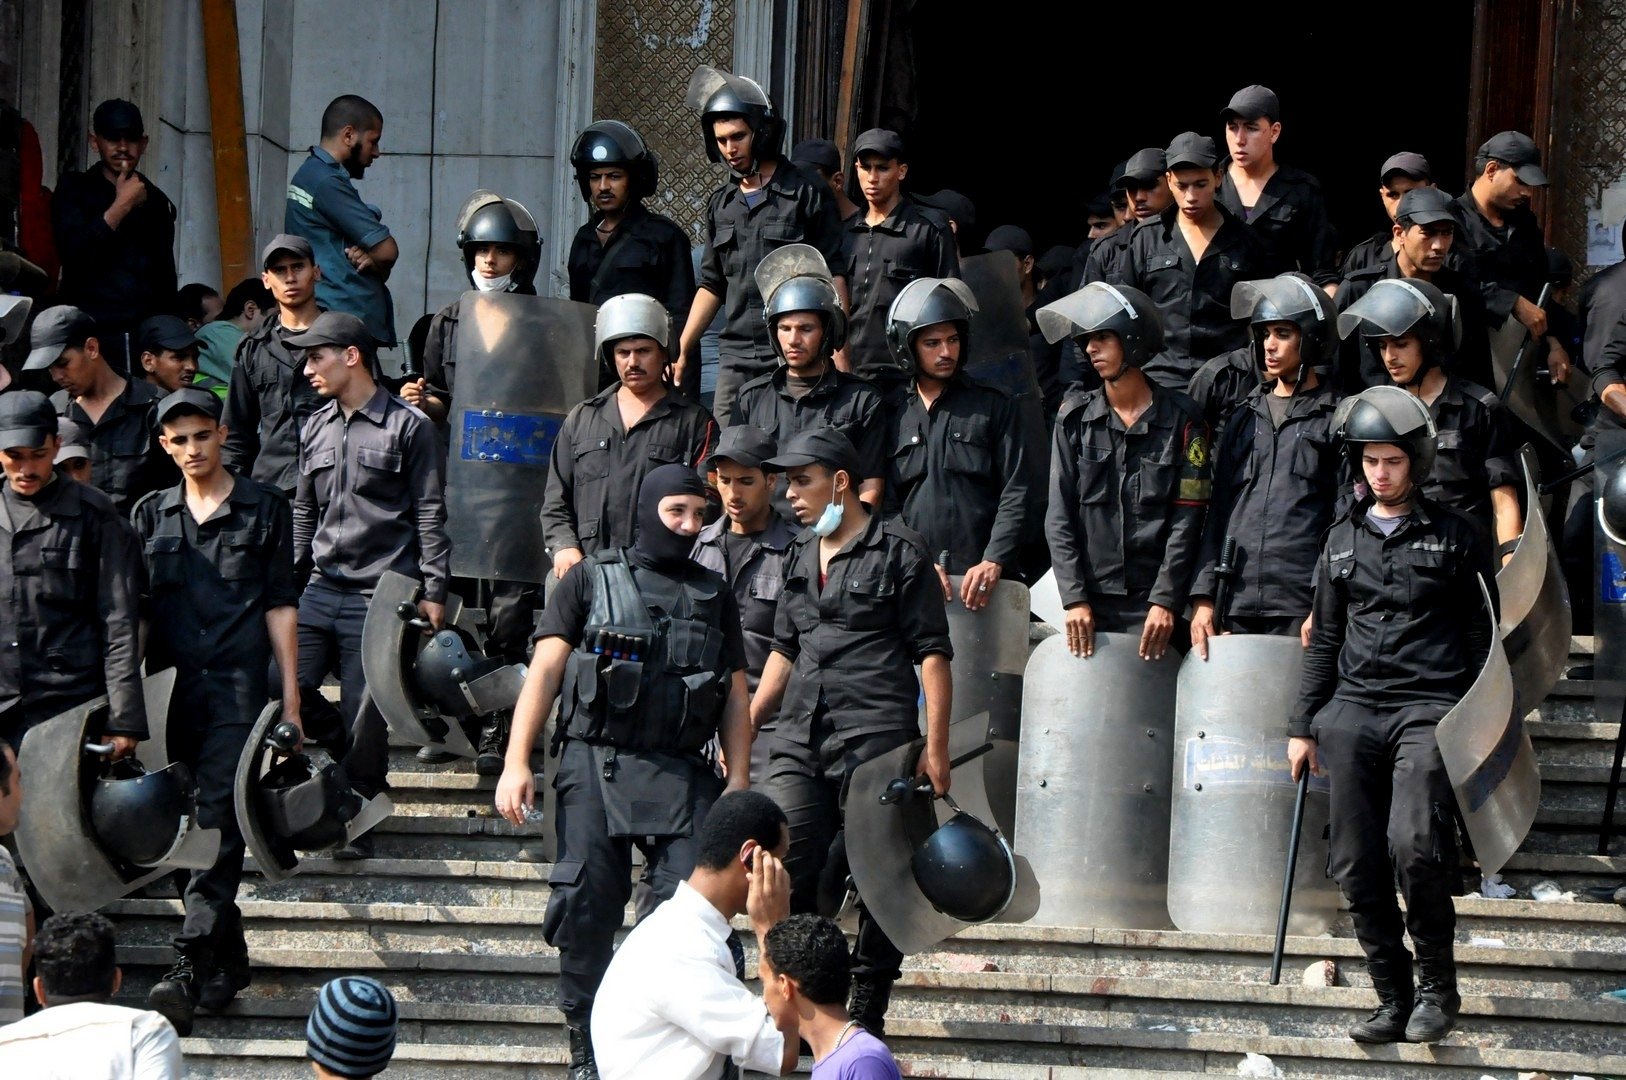 Egyptians security forces provide a cordon around the al-Fatah mosque, after hundreds of Muslim Brotherhood supporters barricaded themselves inside the mosque. Photo: AFP